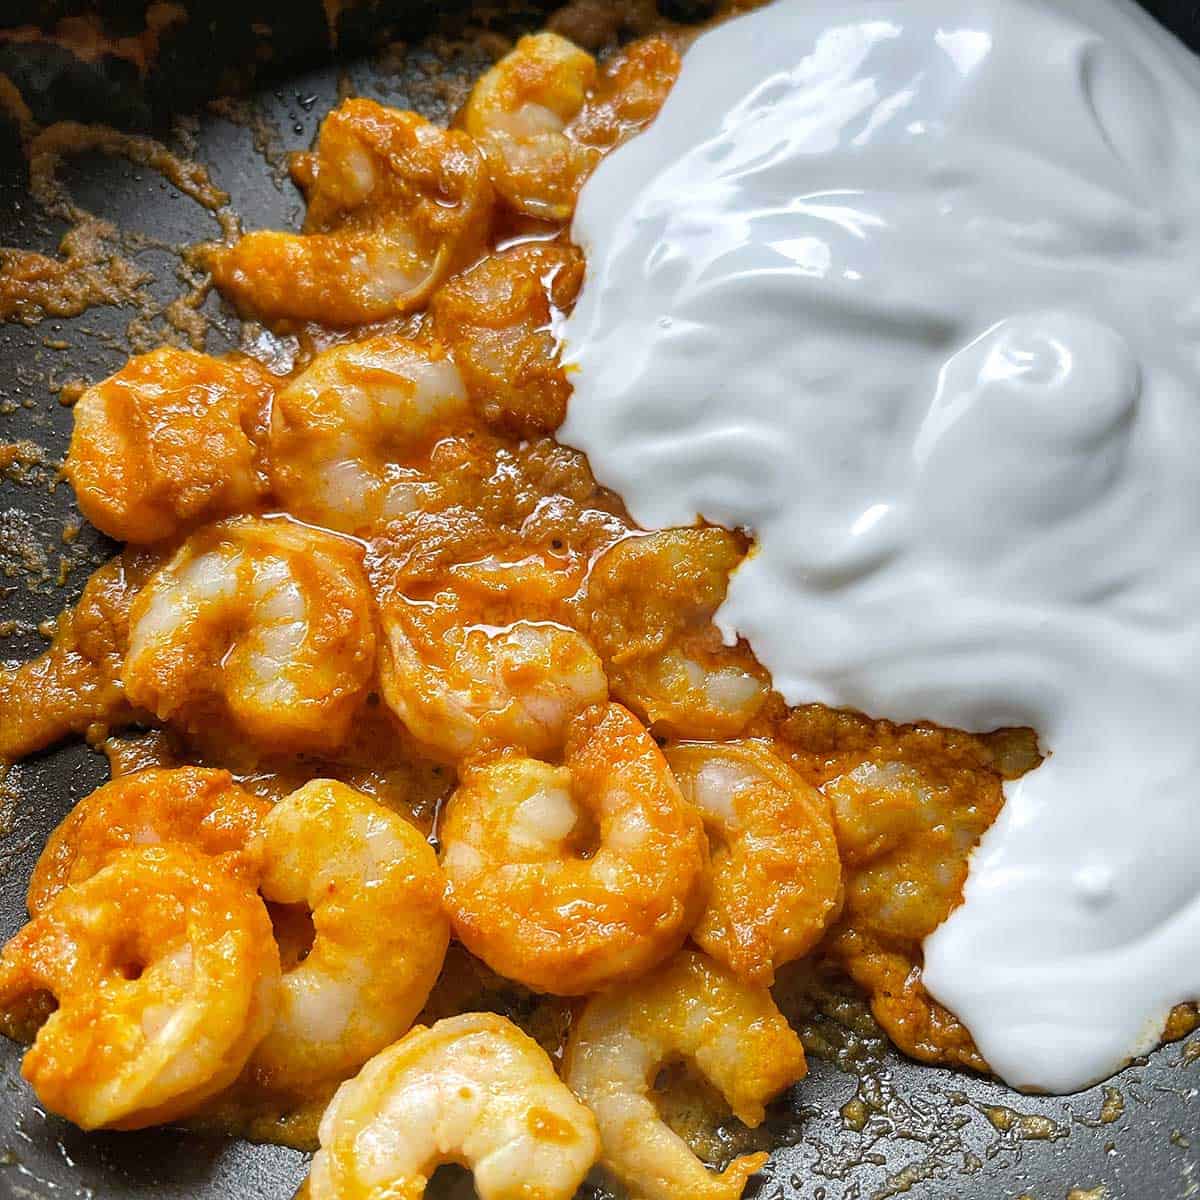 Prawns and coconut cream in a frying pan.